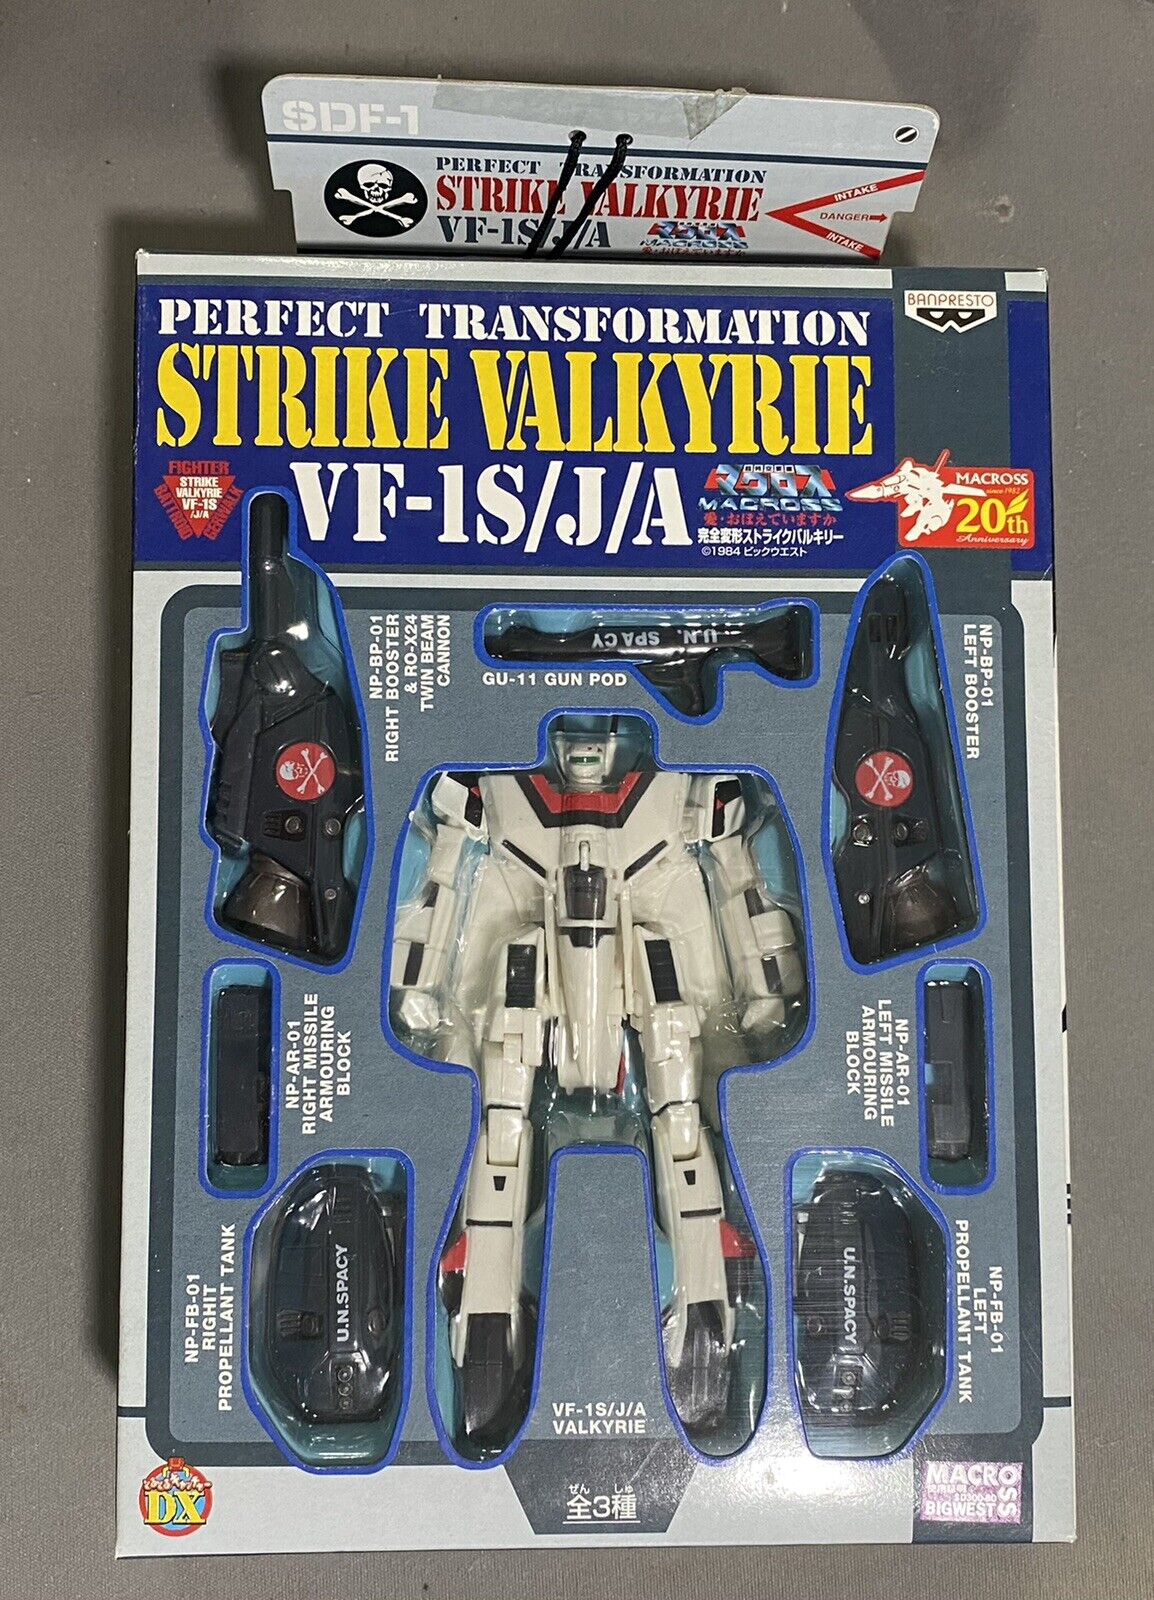 Super Valkyrie VF-1S /J/A Macross Perfect Transformation from Japan